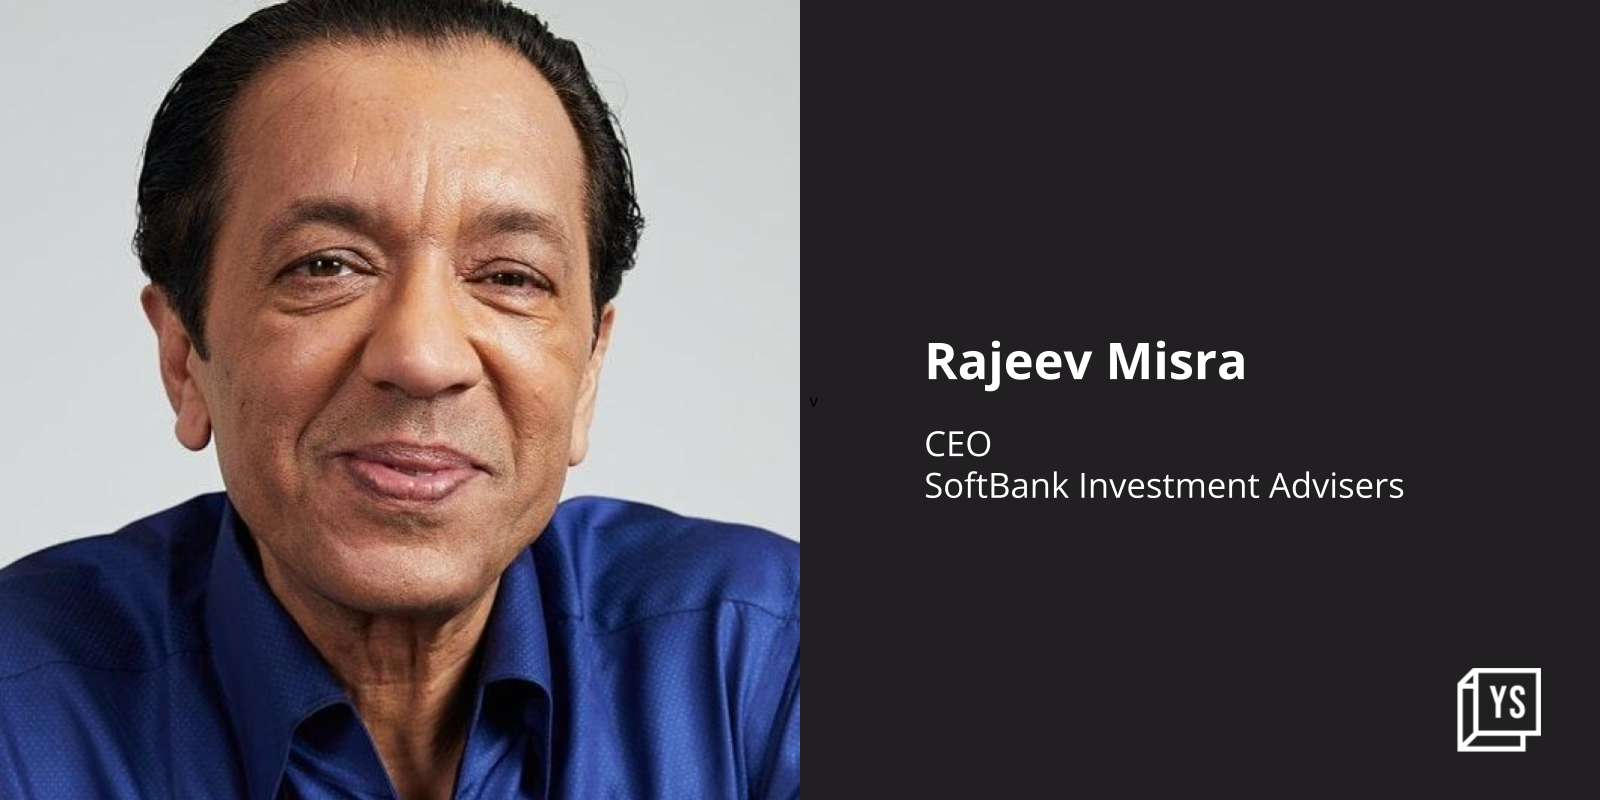 Rajeev Misra takes a step back at SoftBank to set up new fund